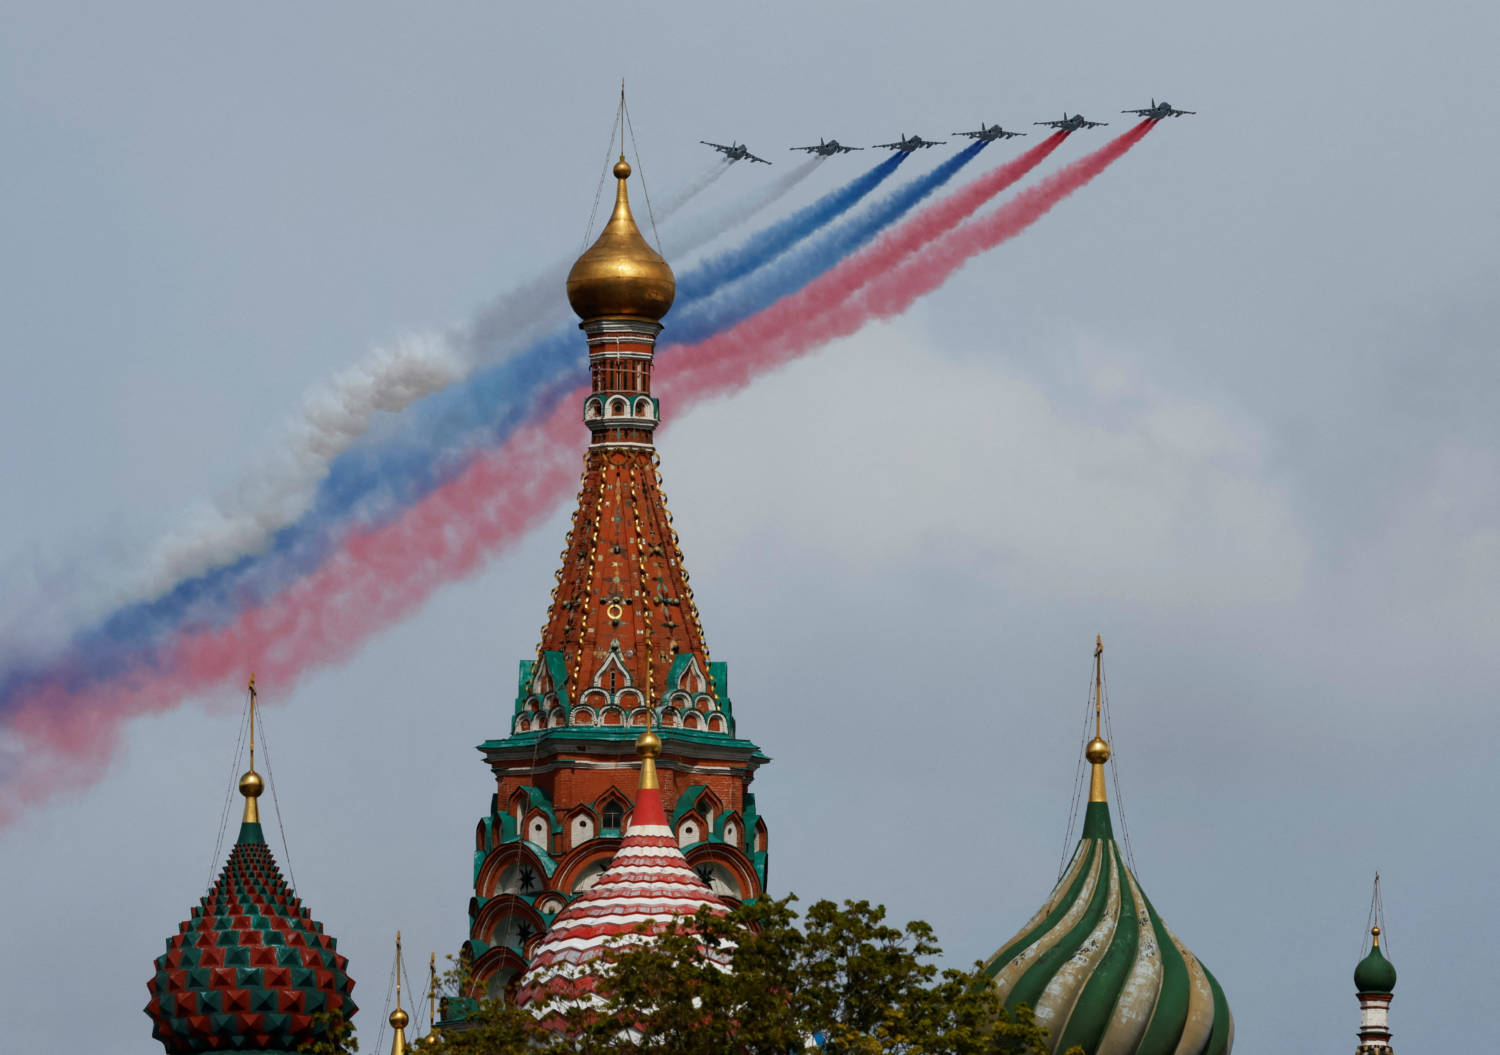 Russia Marks Victory Day With Military Parade In Moscow